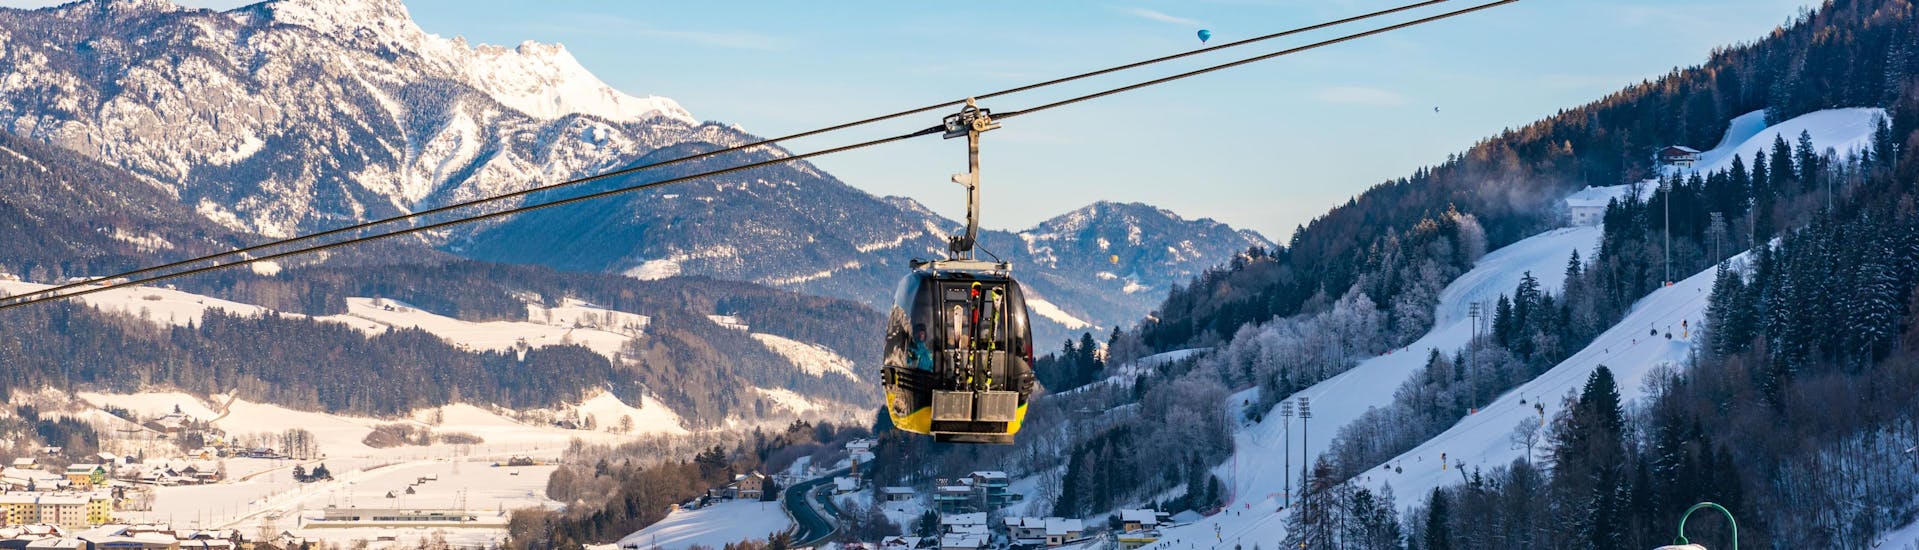 A cable car is suspended over the town of Schladming, a popular destination for ski schools that offer ski lessons in the Ski Amadé Schladming Dachstein region.